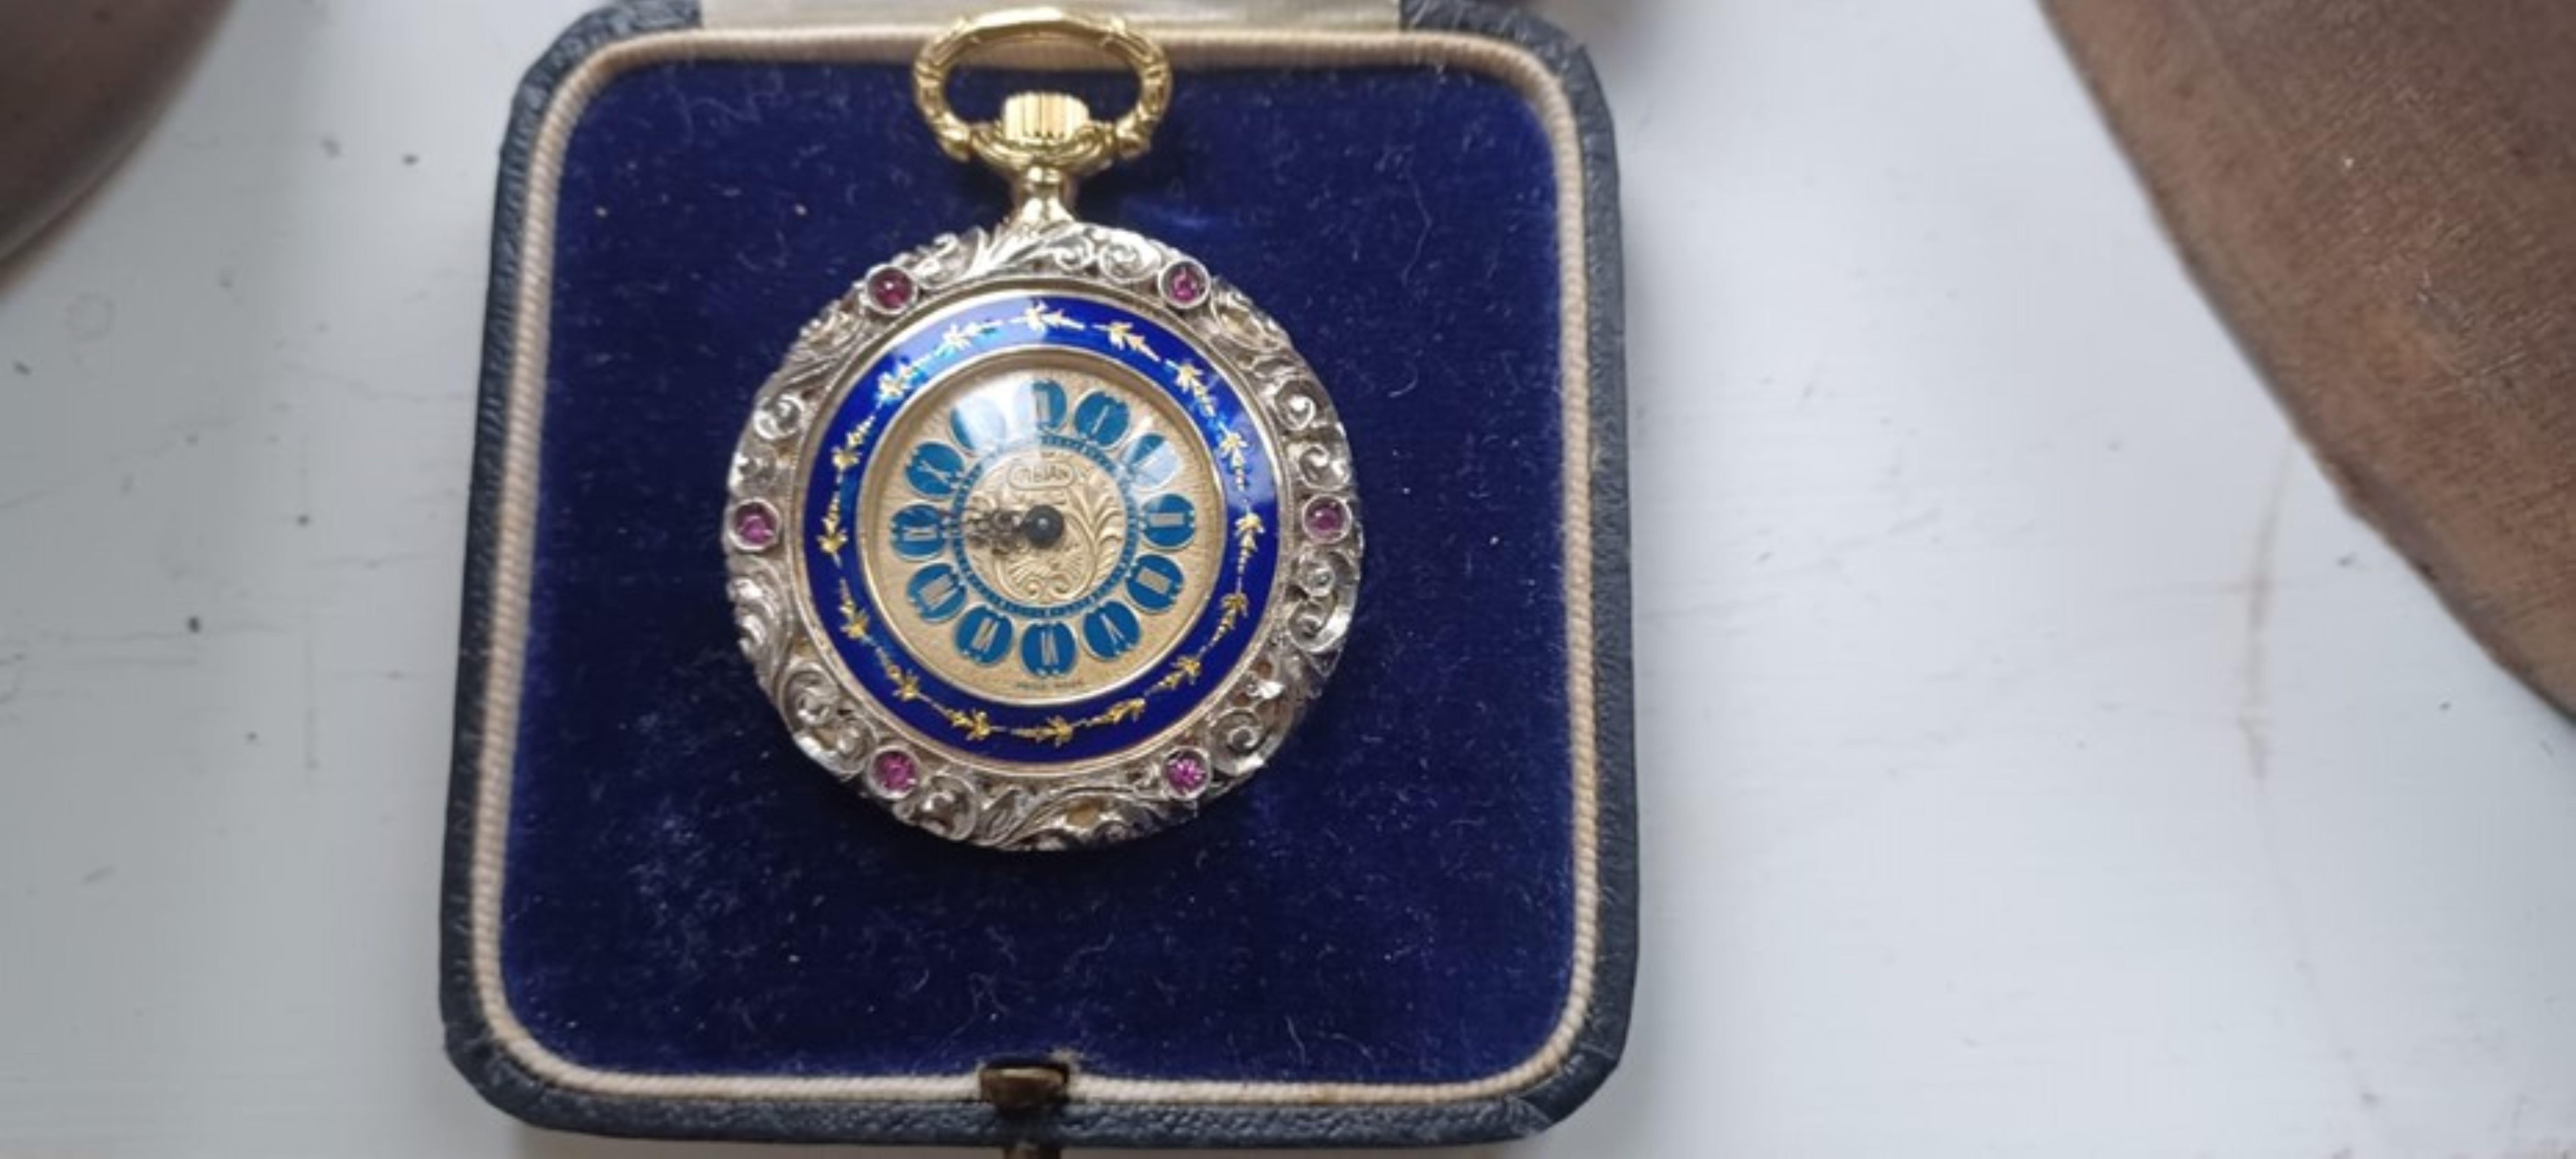 how do i know if my pocket watch is valuable